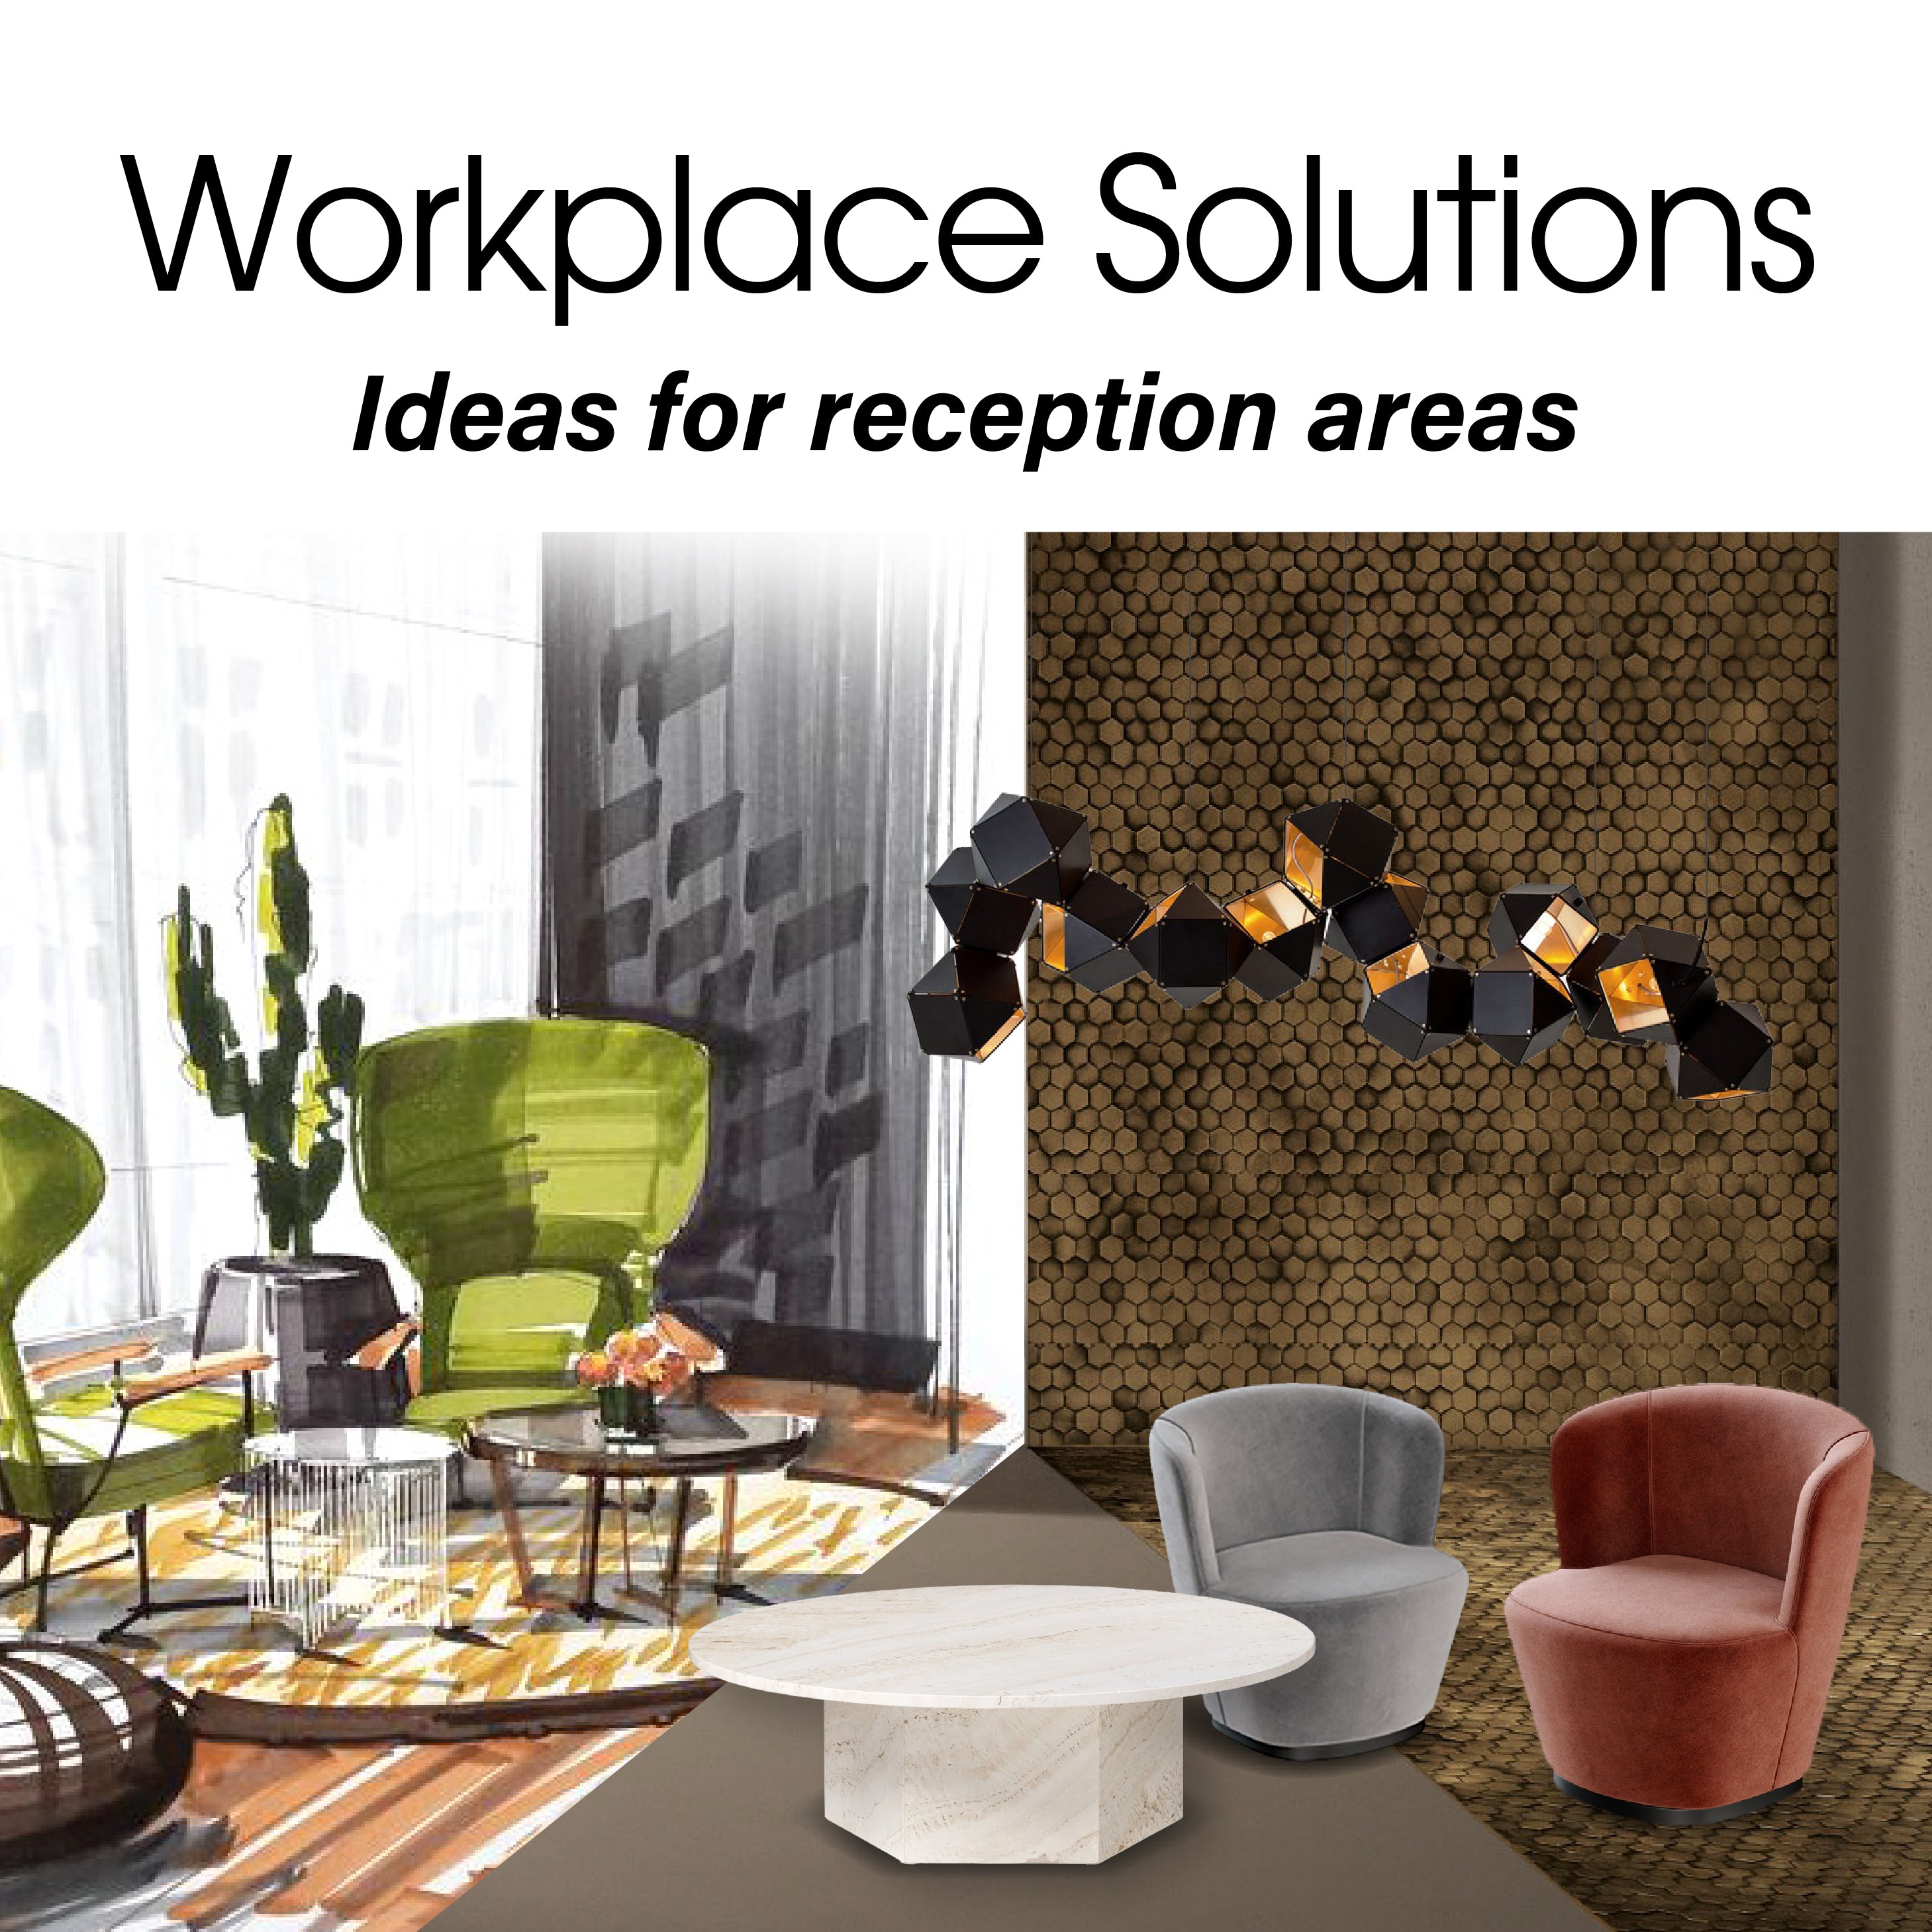 WORKPLACE SOLUTIONS | IDEAS FOR RECEPTION AREAS